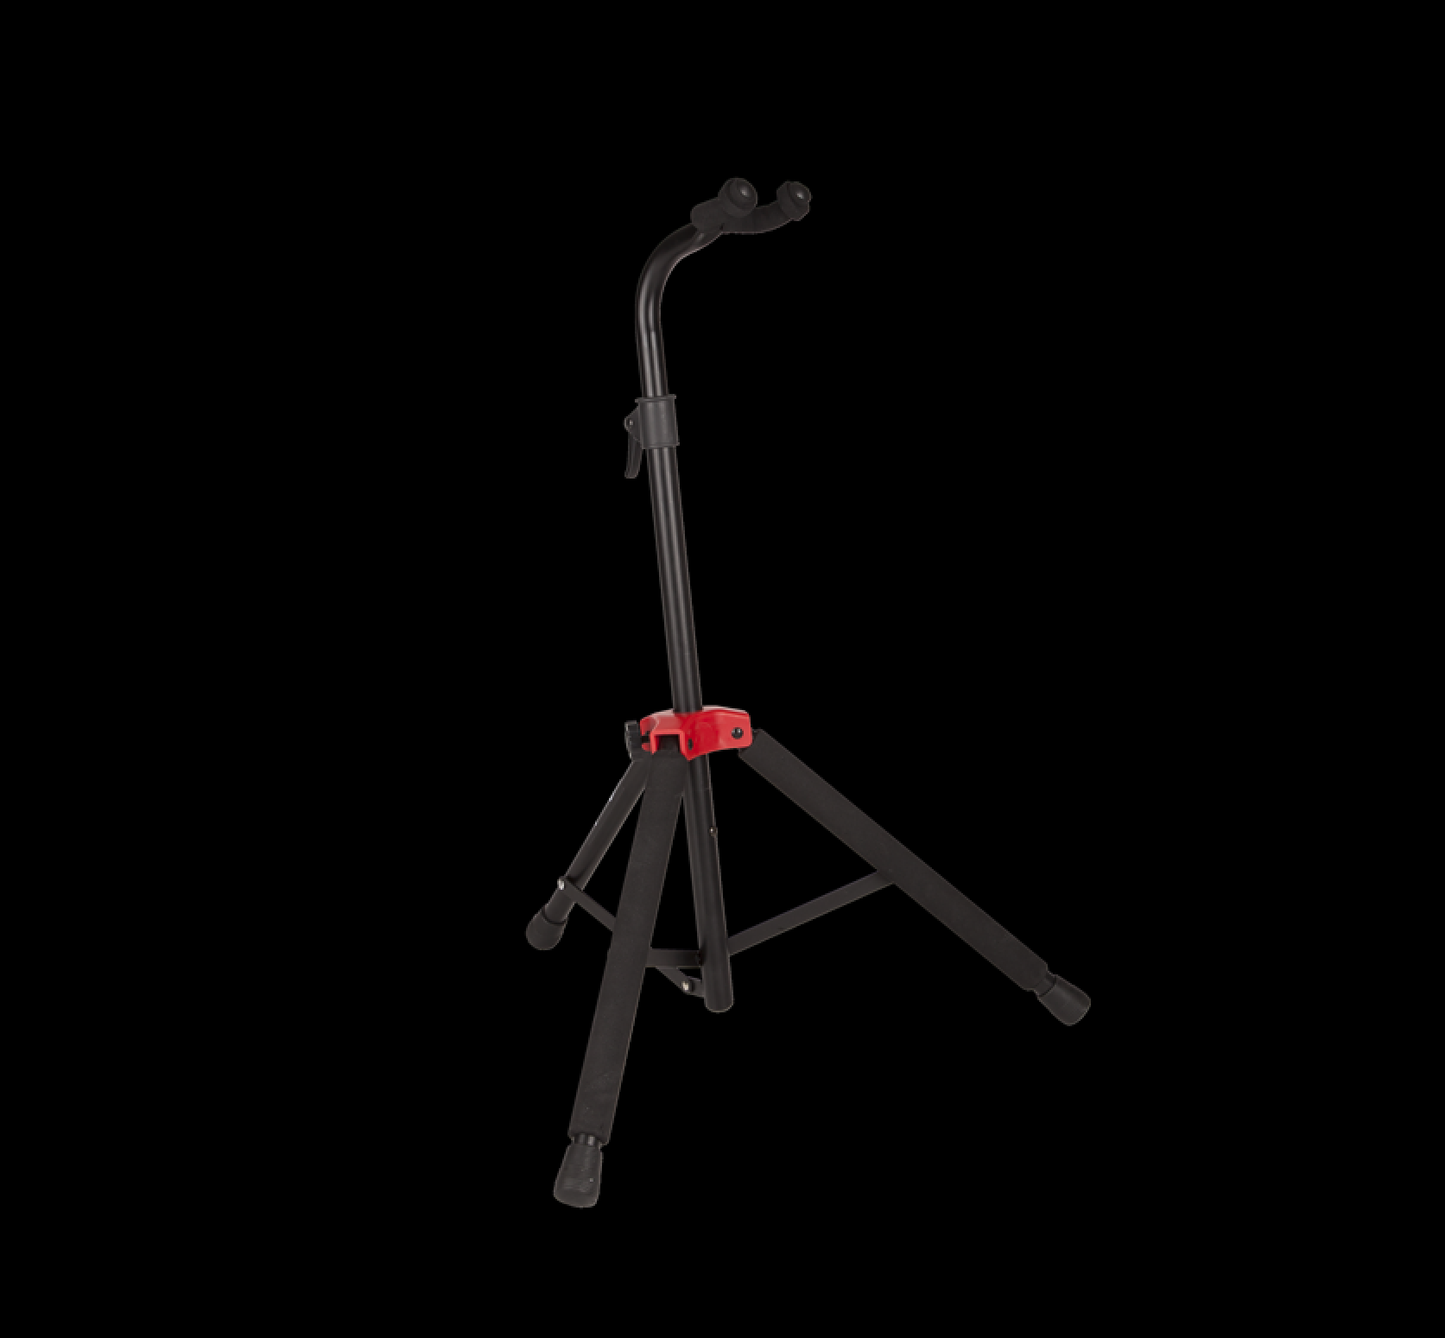 Fender® Deluxe Hanging Guitar Stand, Black/Red